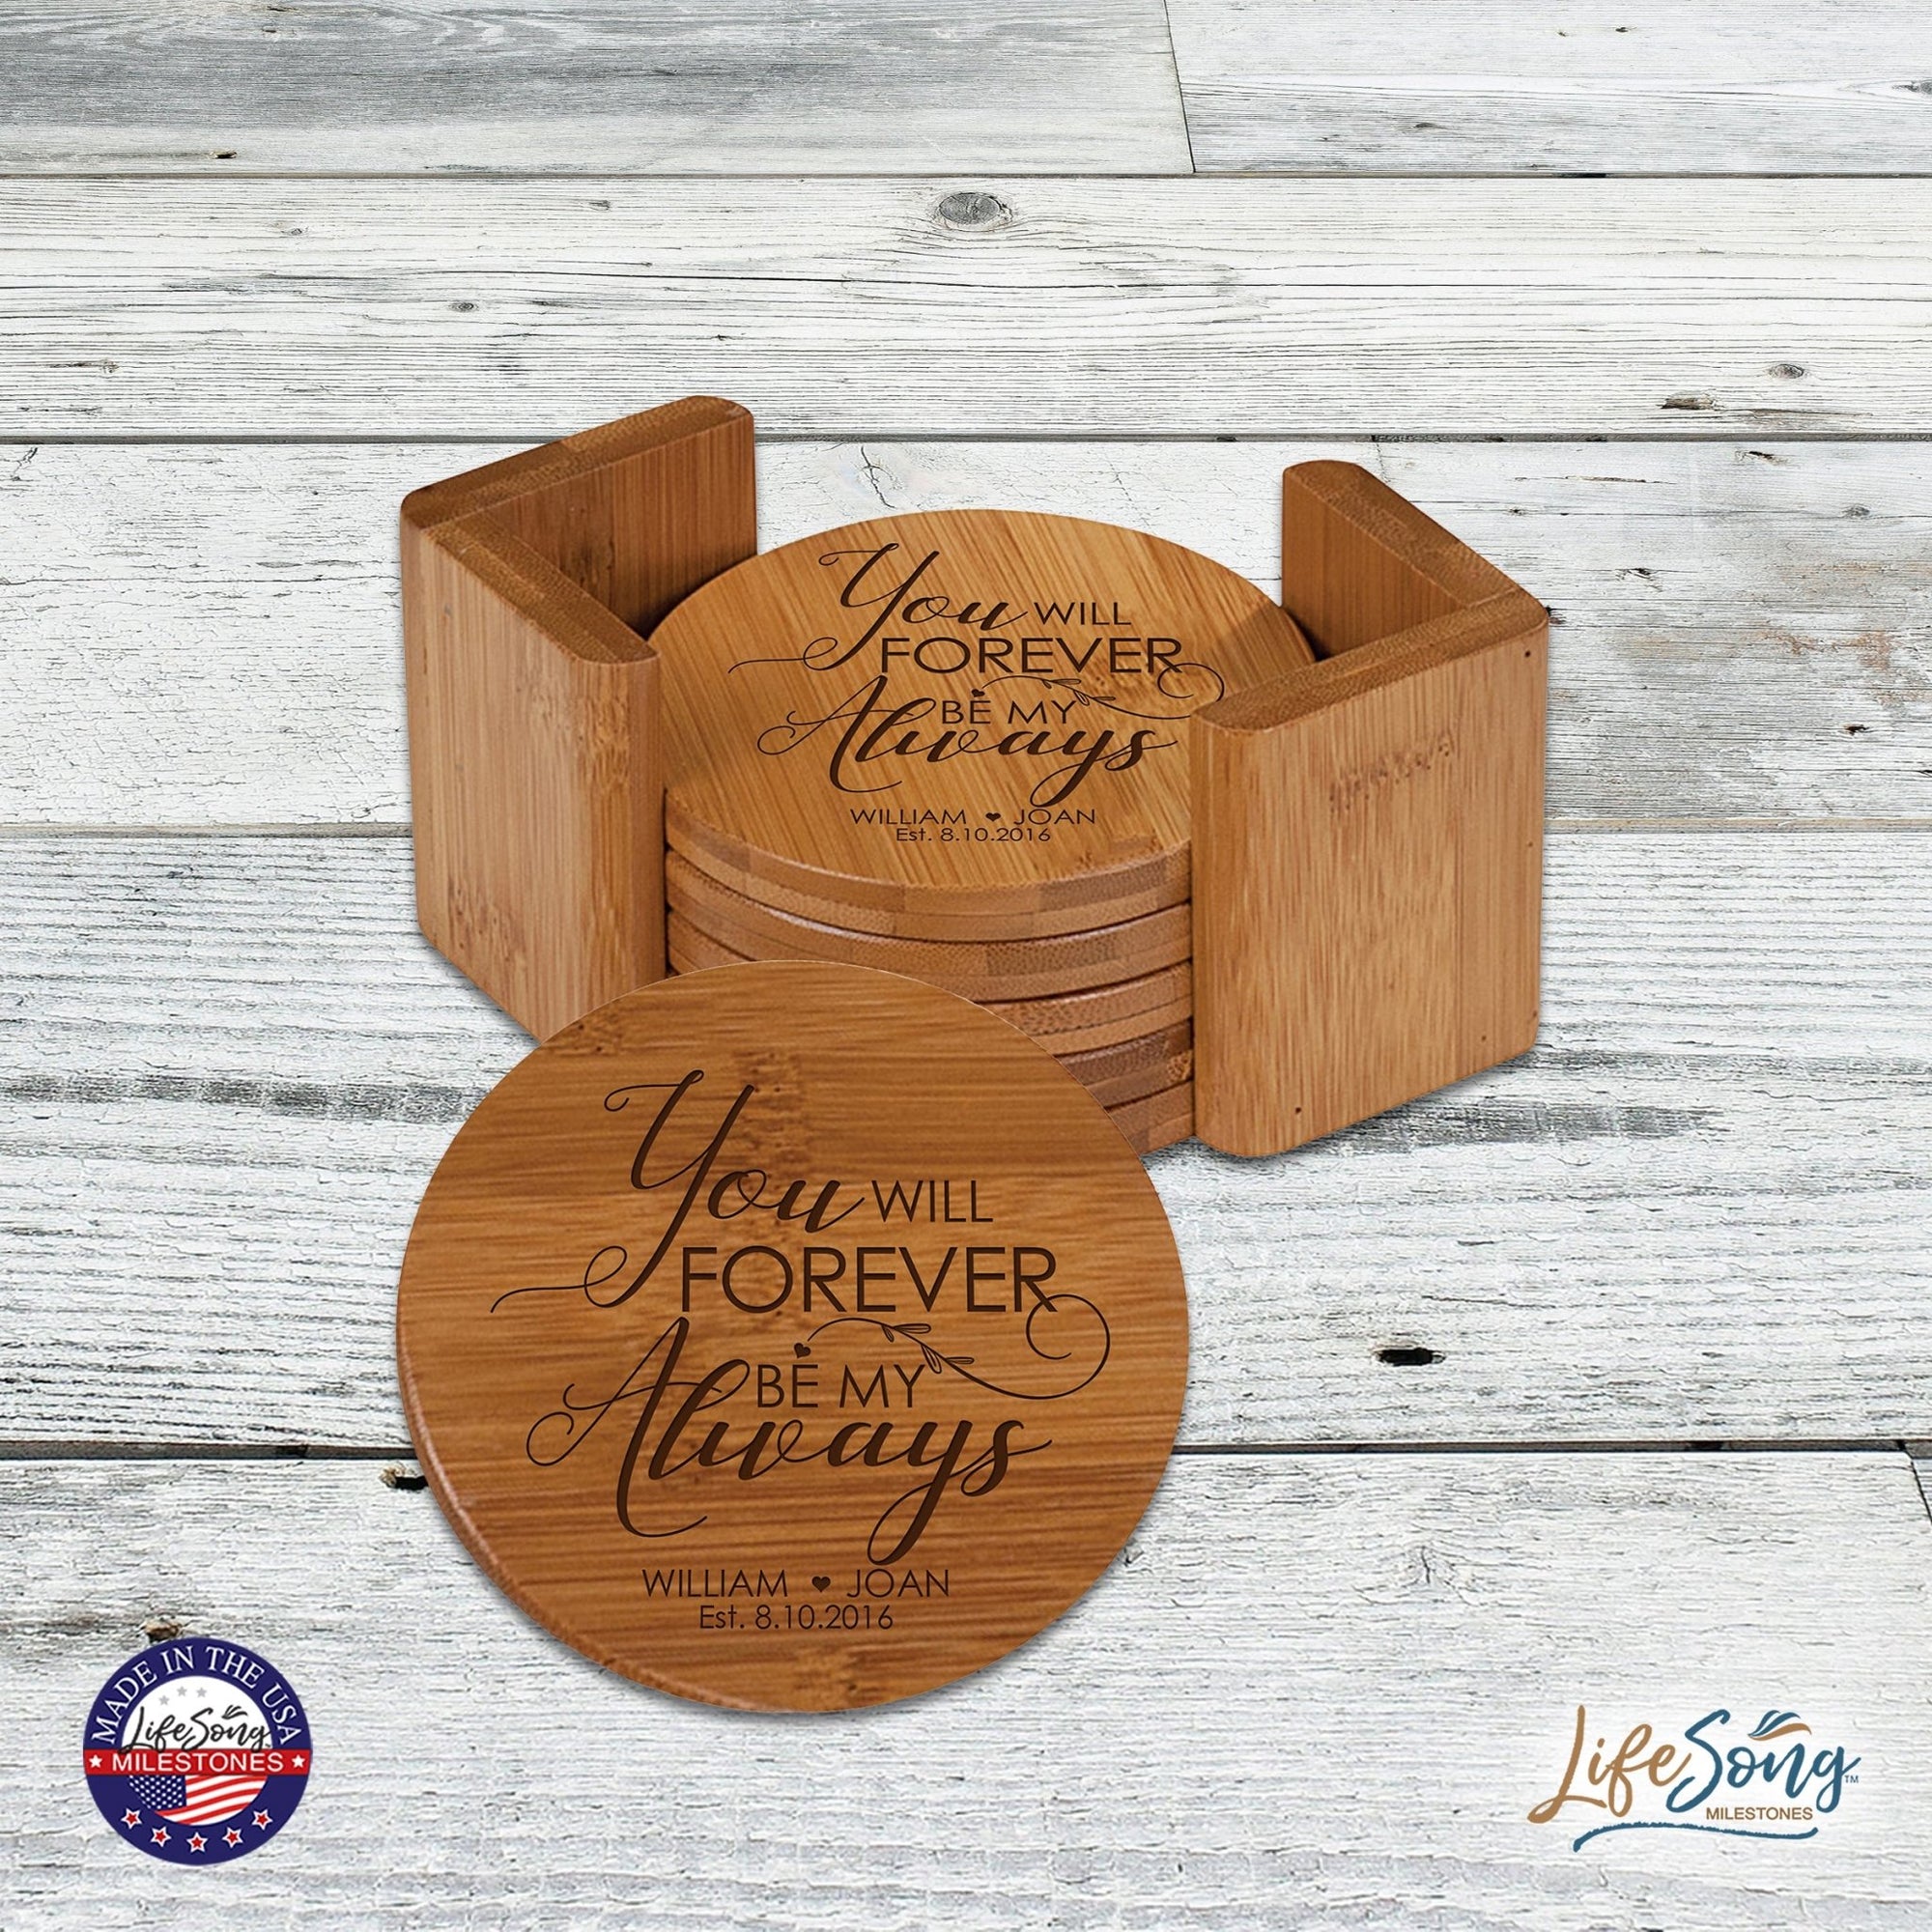 Personalized Family Home 6pc Solid Bamboo Coaster Set With Holder 4.5x4.5 – You Will Forever - LifeSong Milestones